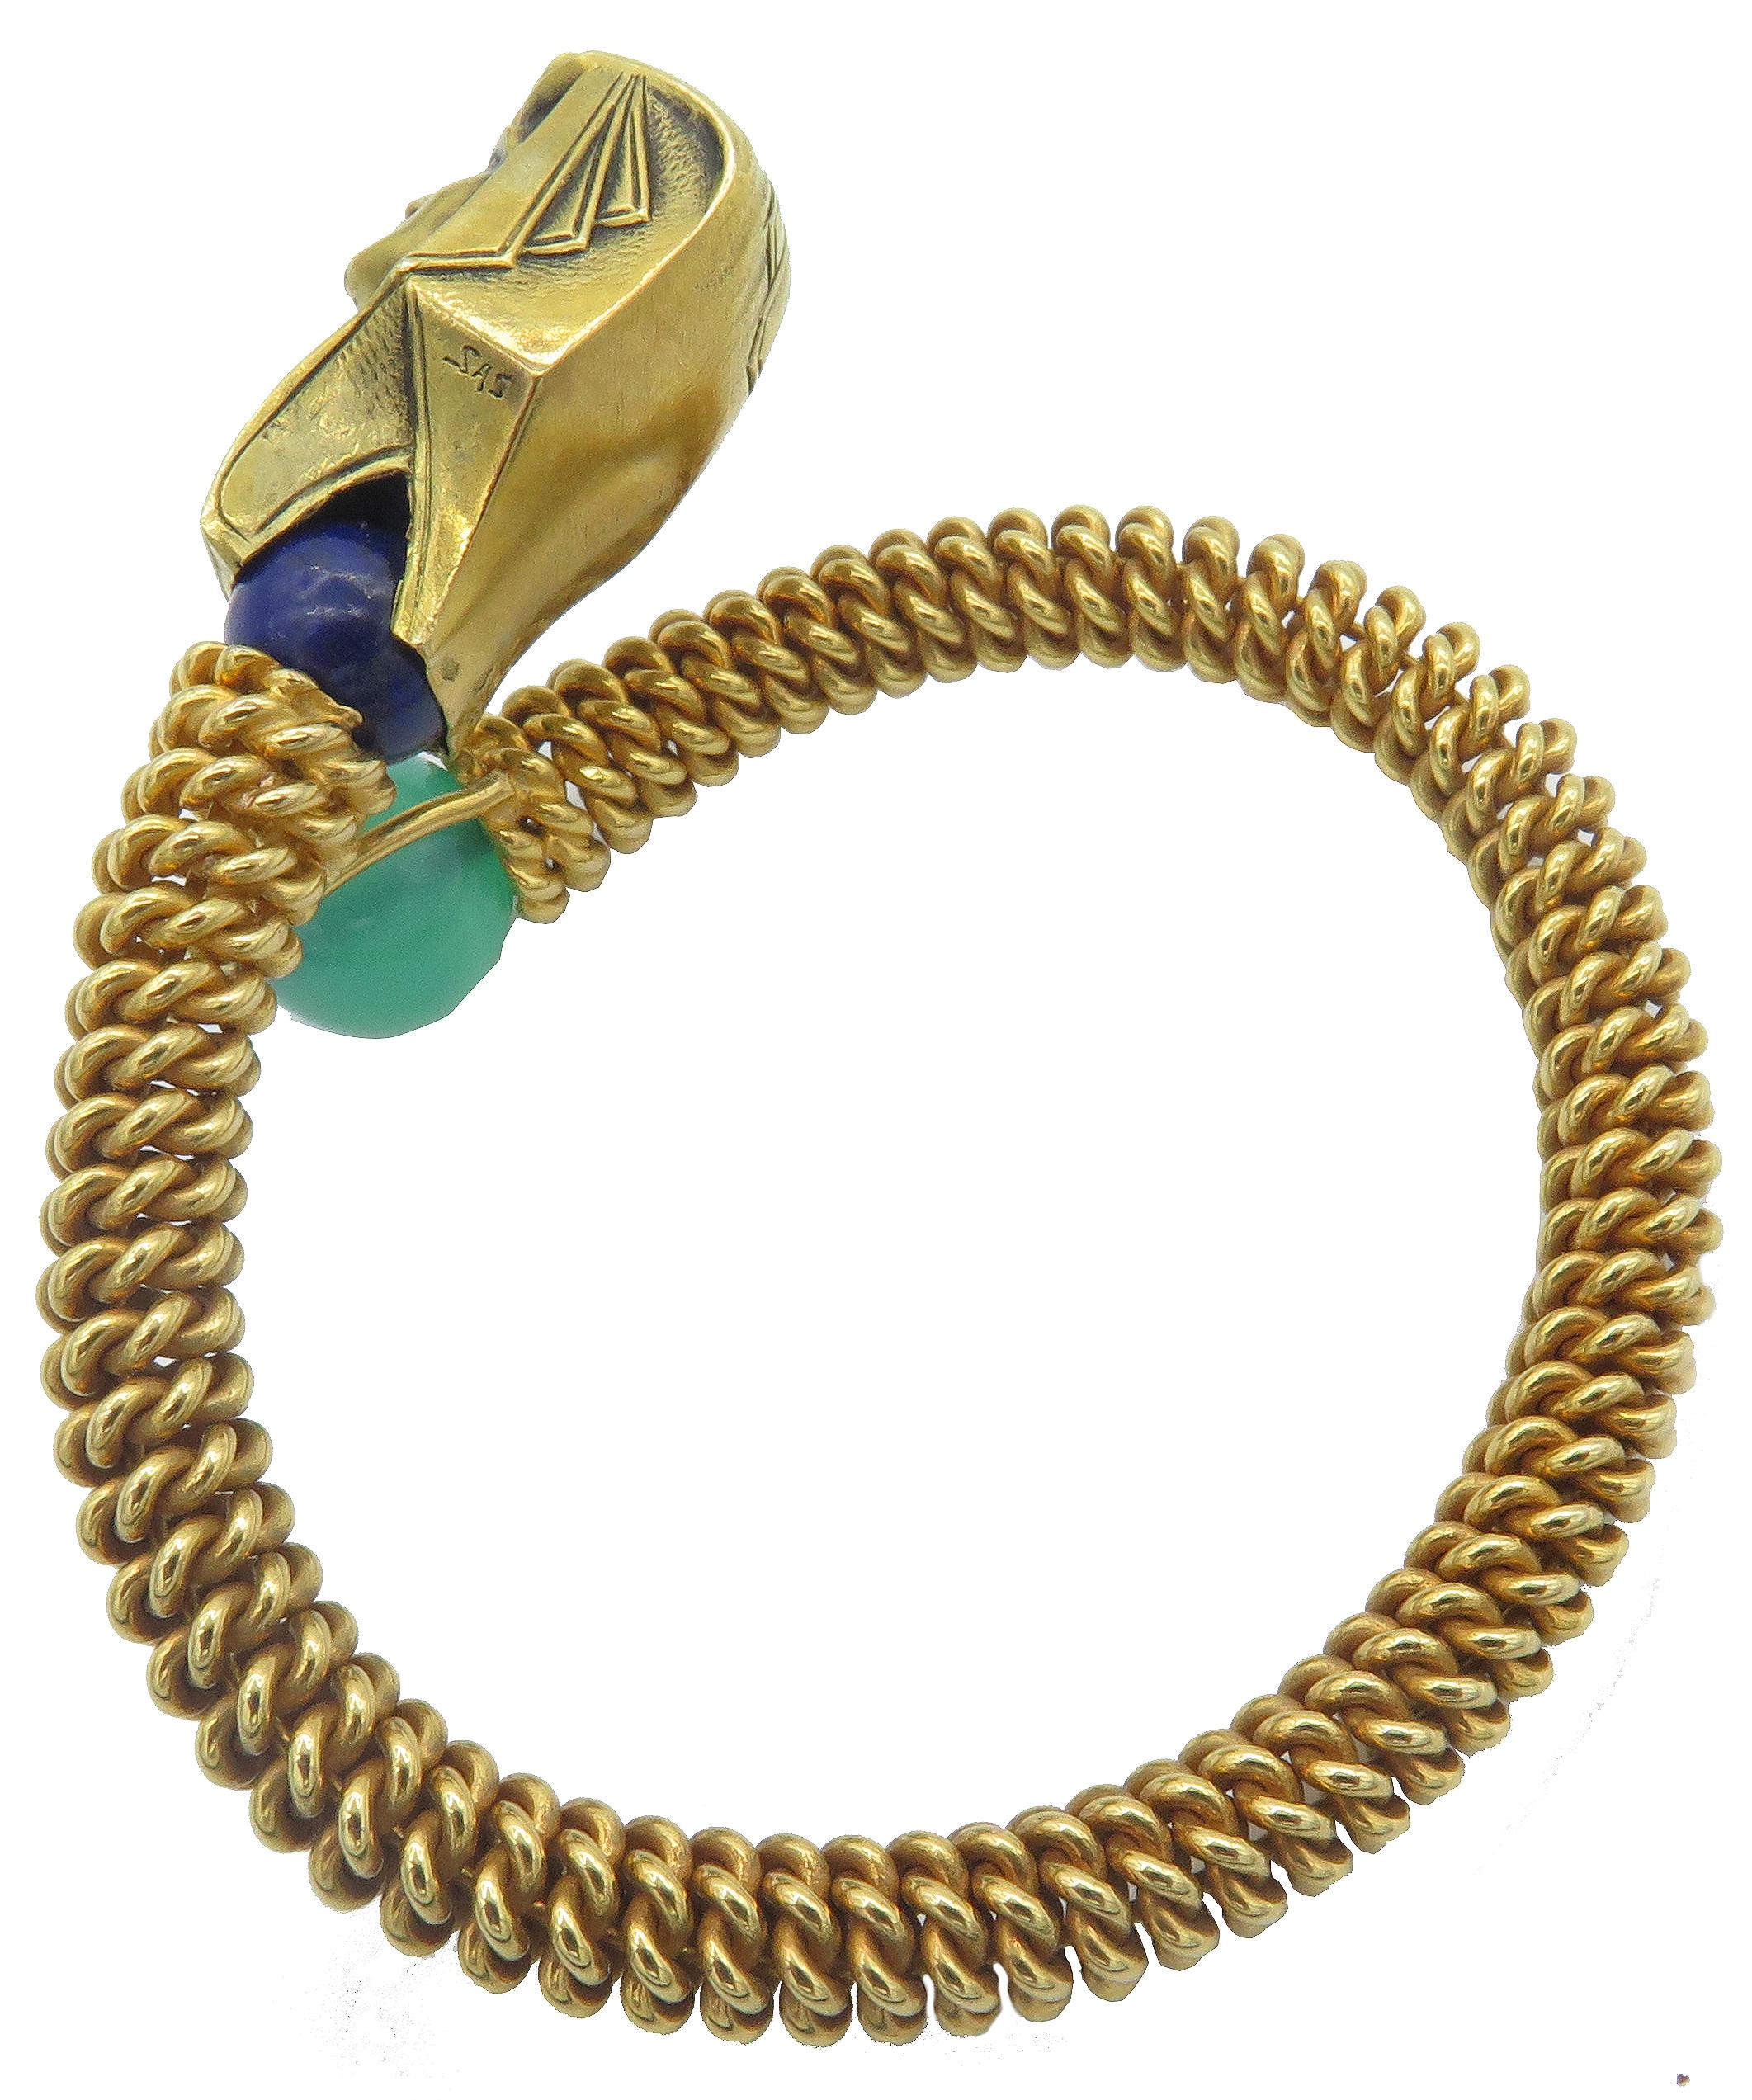 The Egyptians were leaders in manufacturing jewelry like this bold and beautiful 18k Yellow Gold Egyptian Bracelet, symbolic of the Pharaohs of Ancient Egypt. The head of the Pharaoh is mounted on a semiprecious lapis stone and enamel stripes add